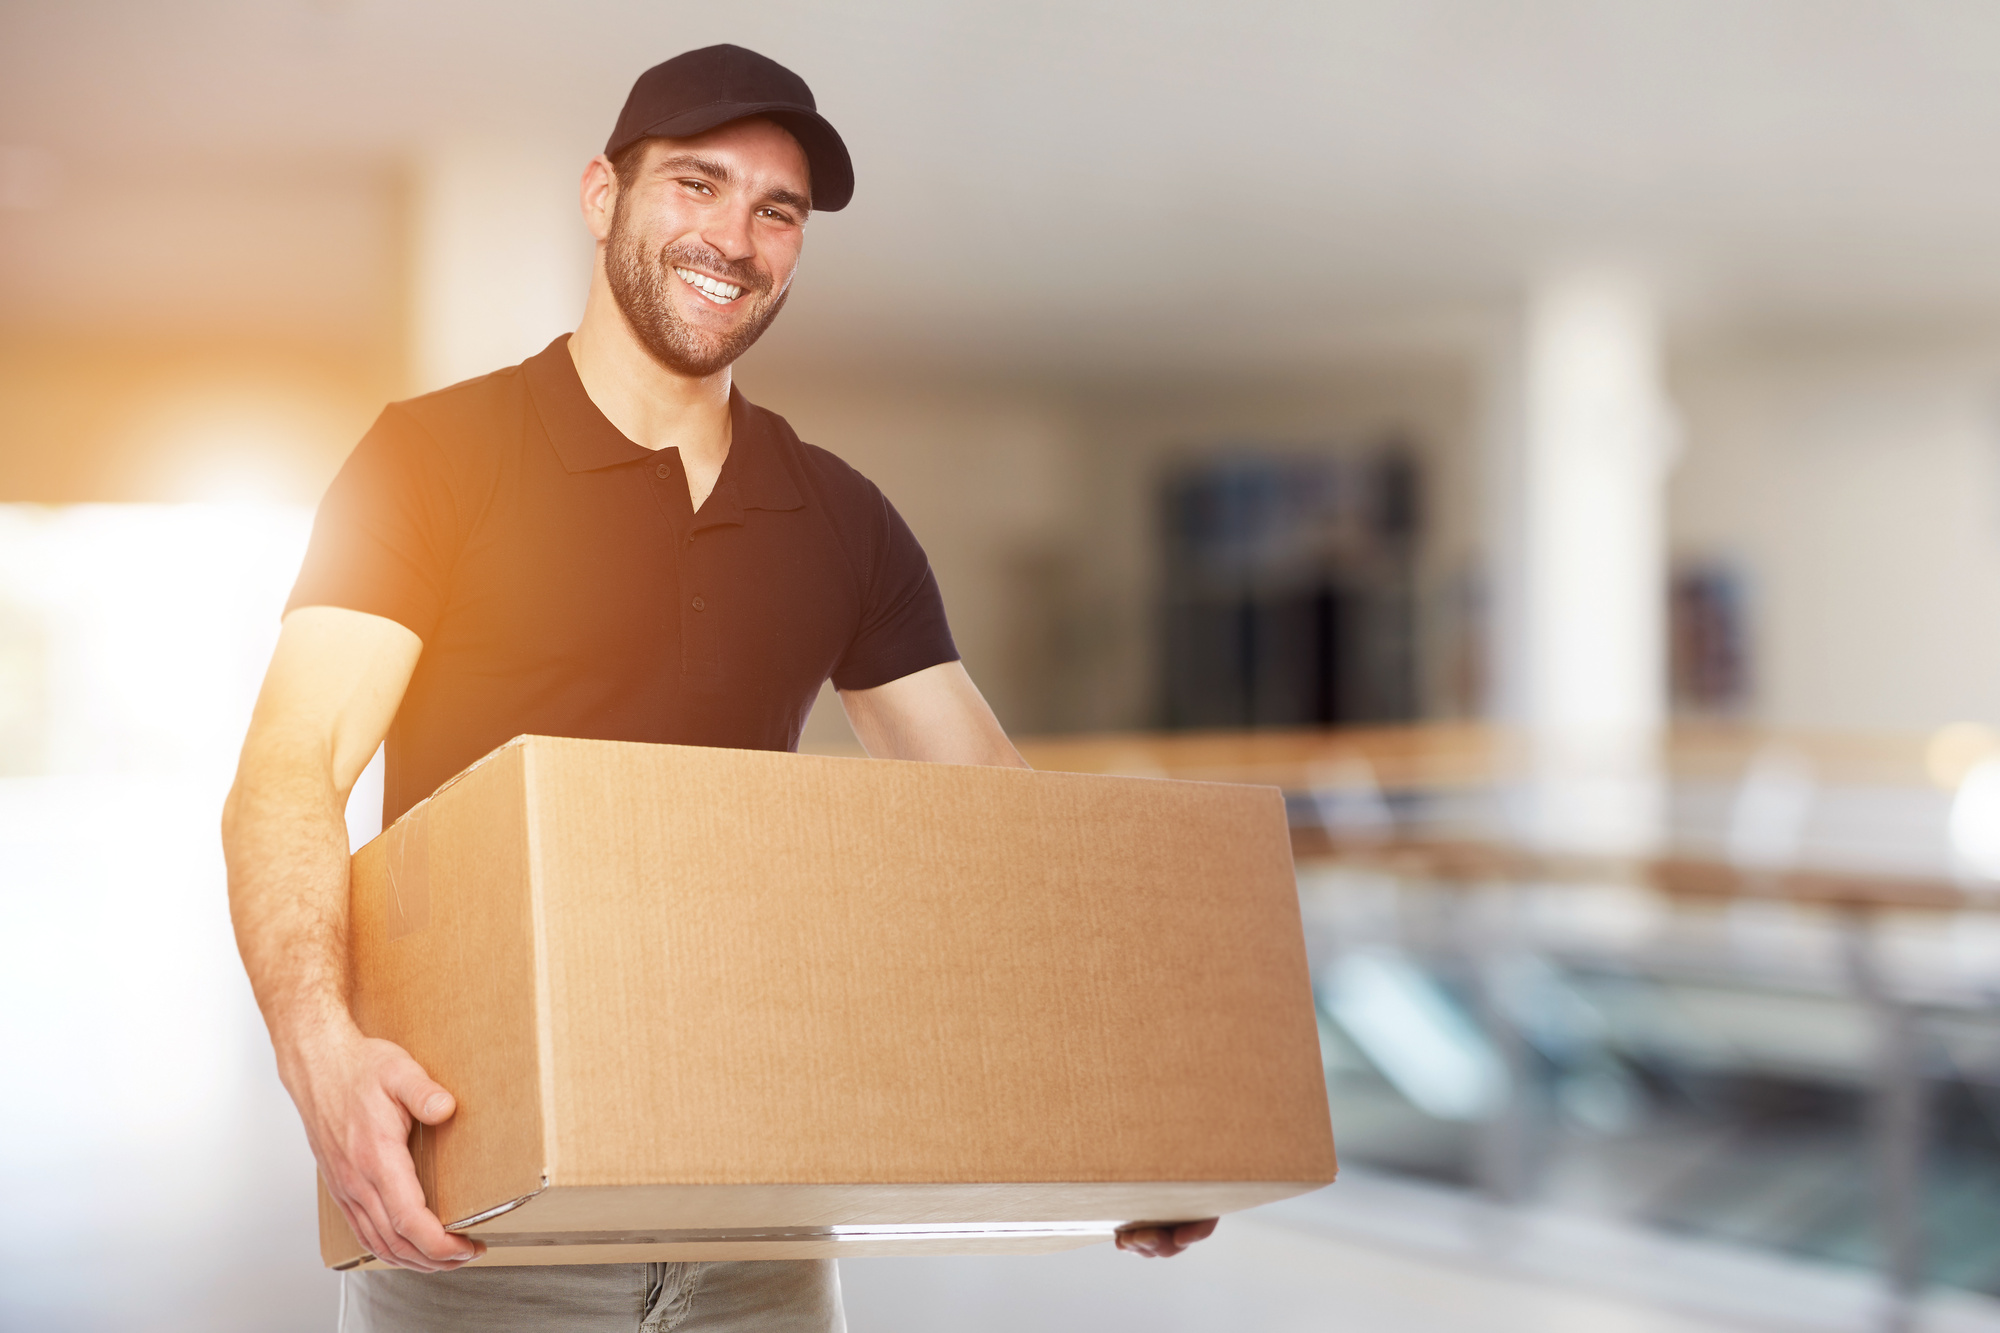 7 Factors to Consider When Hiring a Courier Service